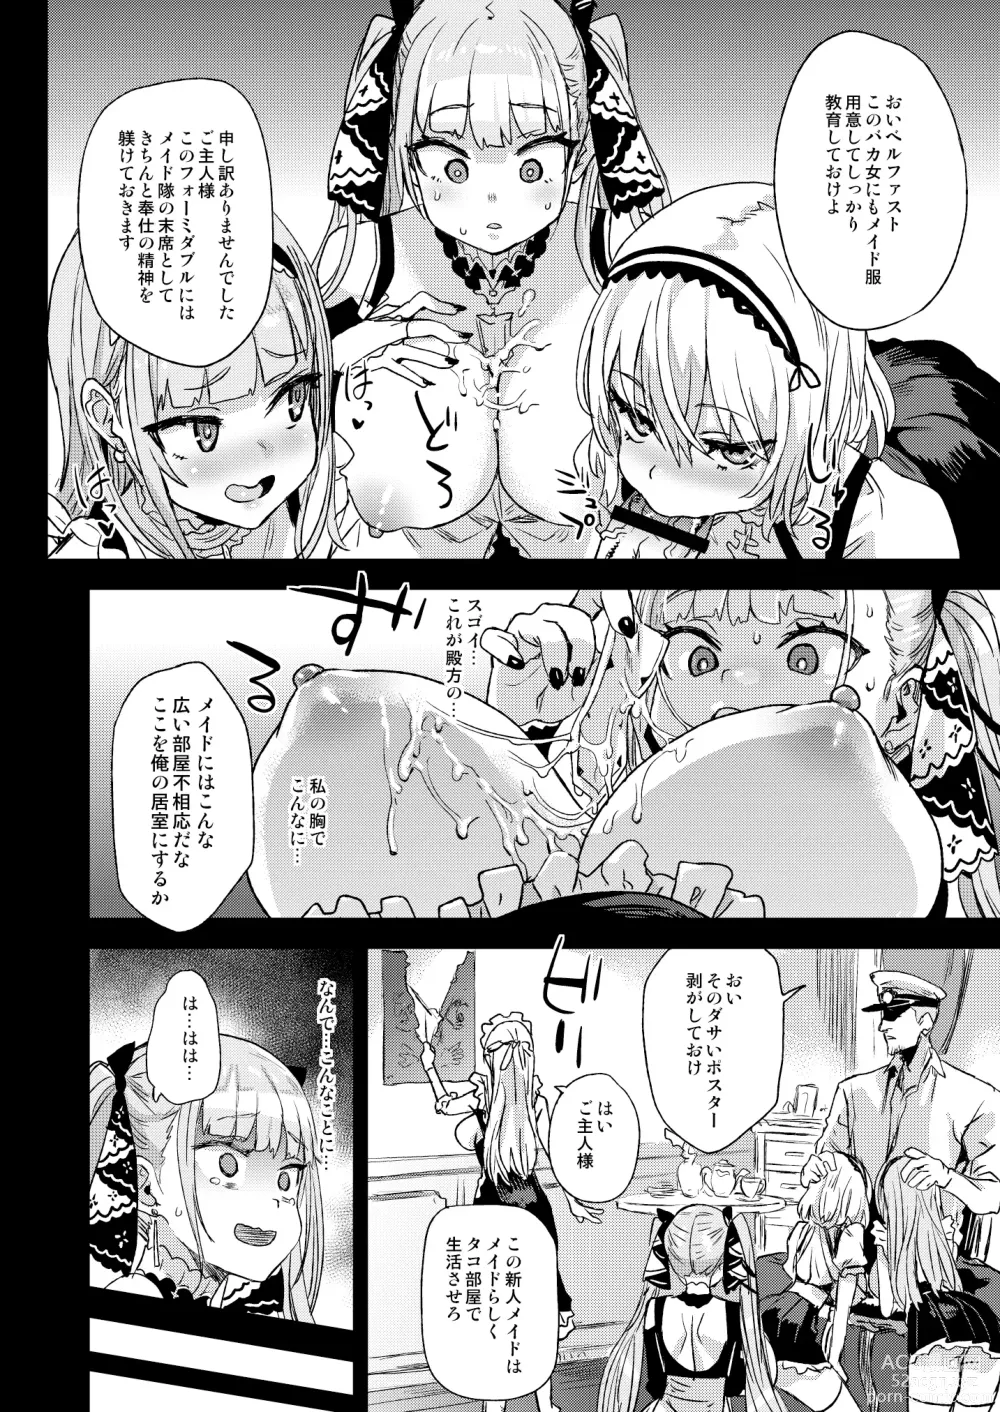 Page 8 of doujinshi Lady falls into a maid